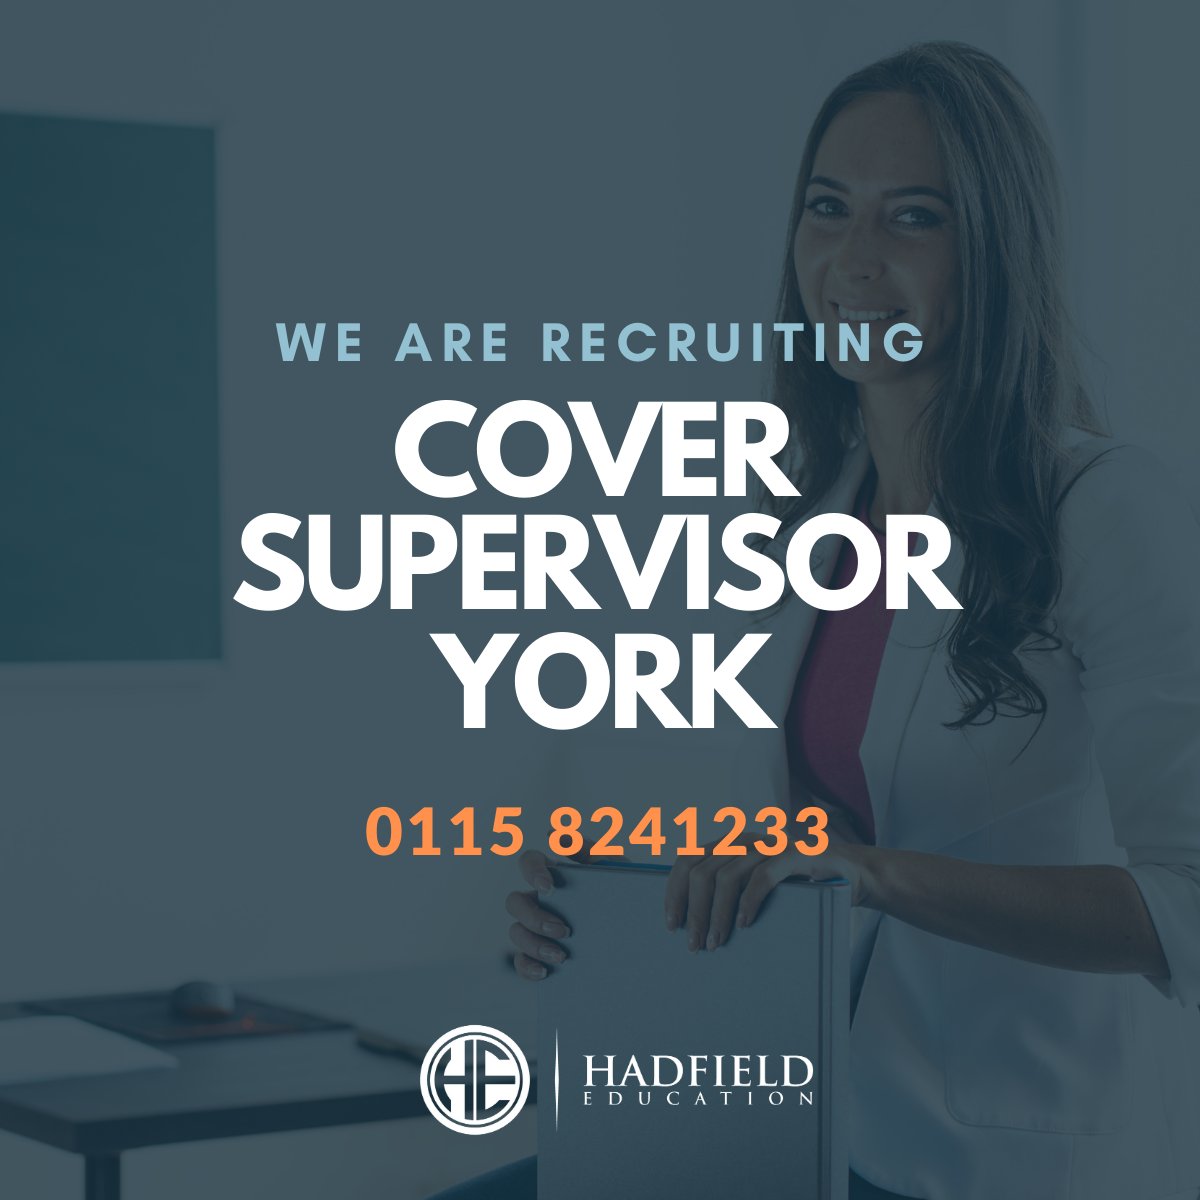 🌟 Fantastic opportunity! 🌟 We're seeking a Cover Supervisor in 📍York 🎓 Apply now and be part of our great team! 💼 #YorkJobs #TeachingJobs #CoverSupervisorJobs 🚀 bit.ly/3OS5WYX